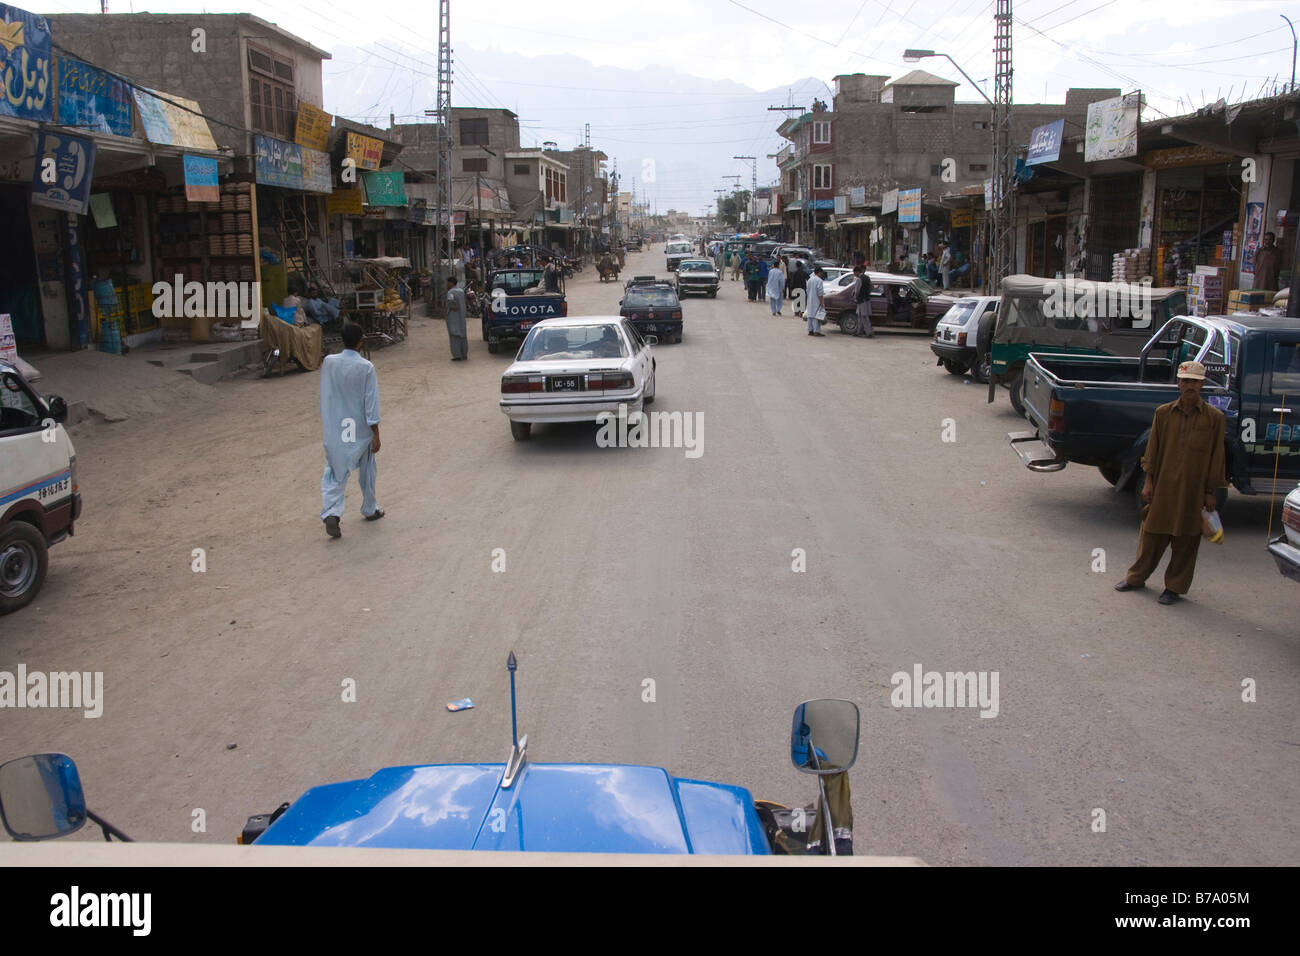 The main street,pedestrians and car traffic in the town of Skardu in Baltistan in Pakistan Stock Photo